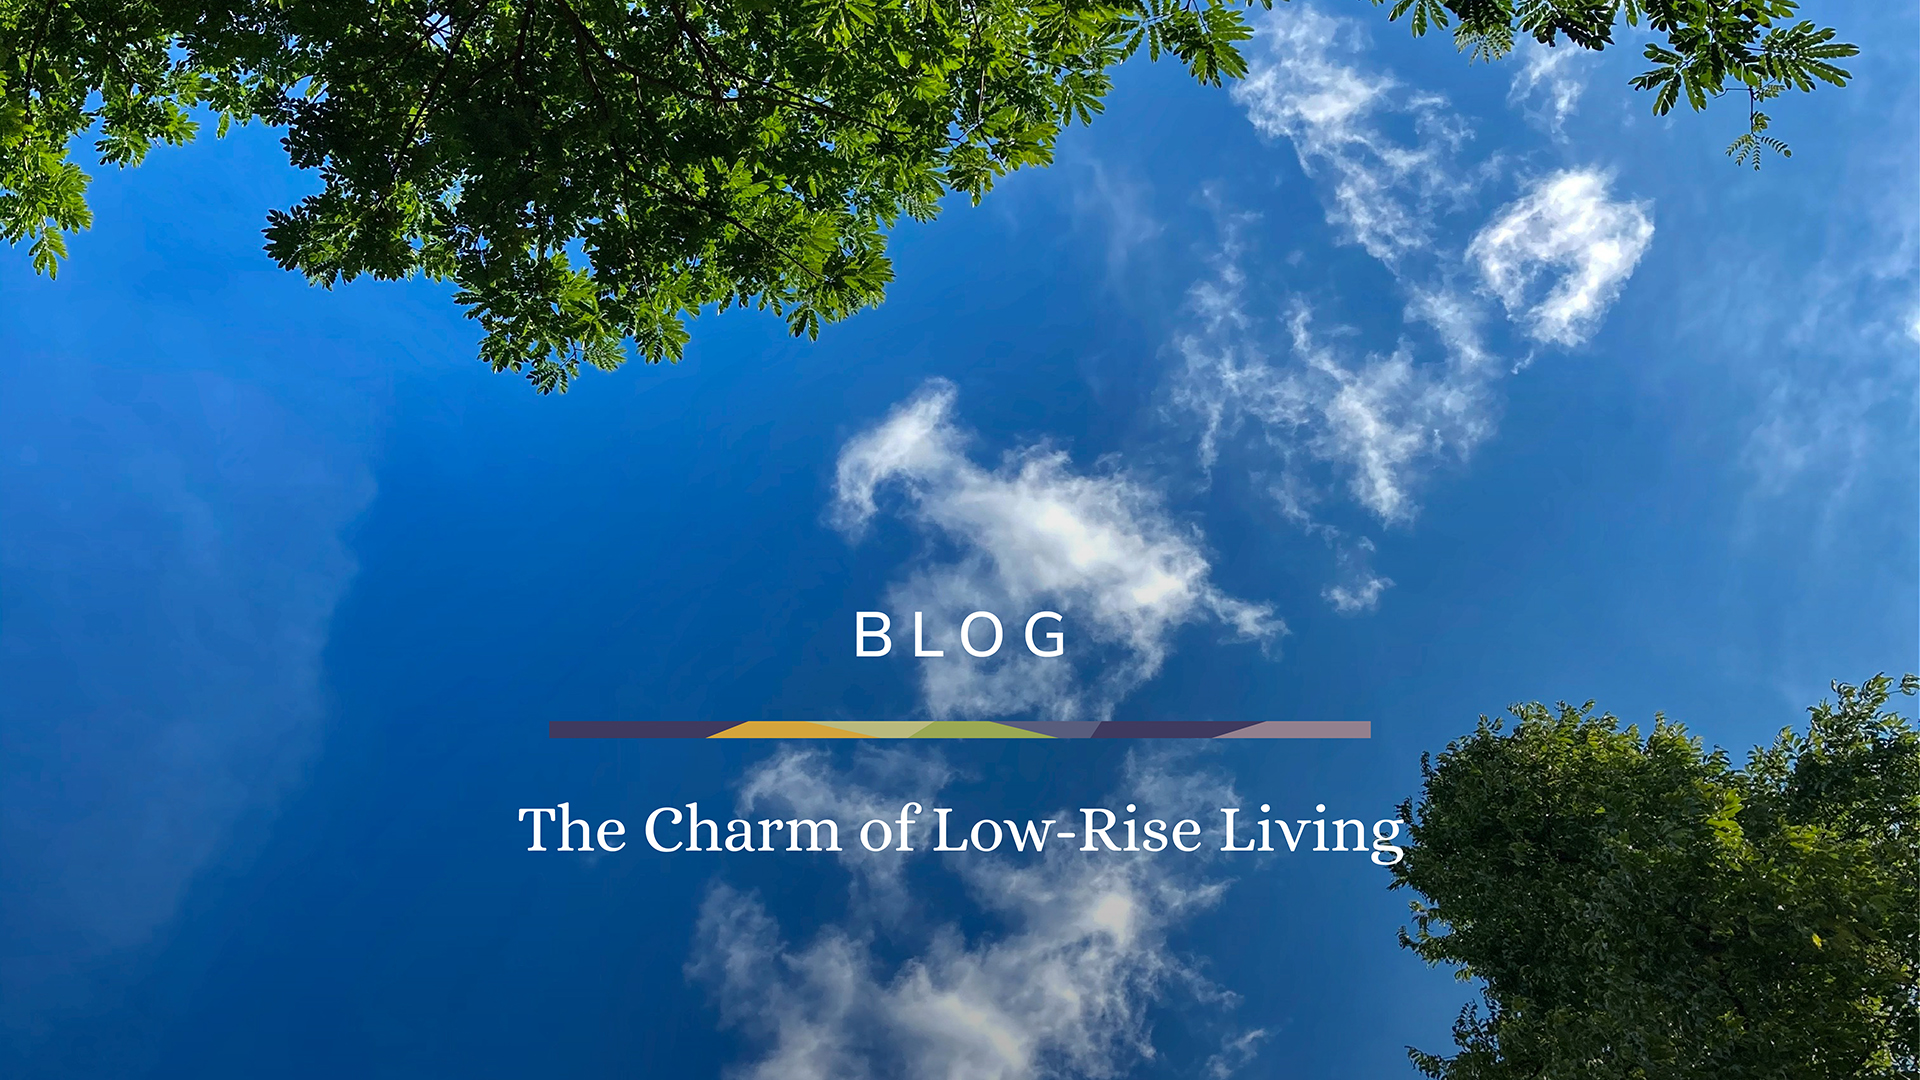 The Charm of Low-Rise Living